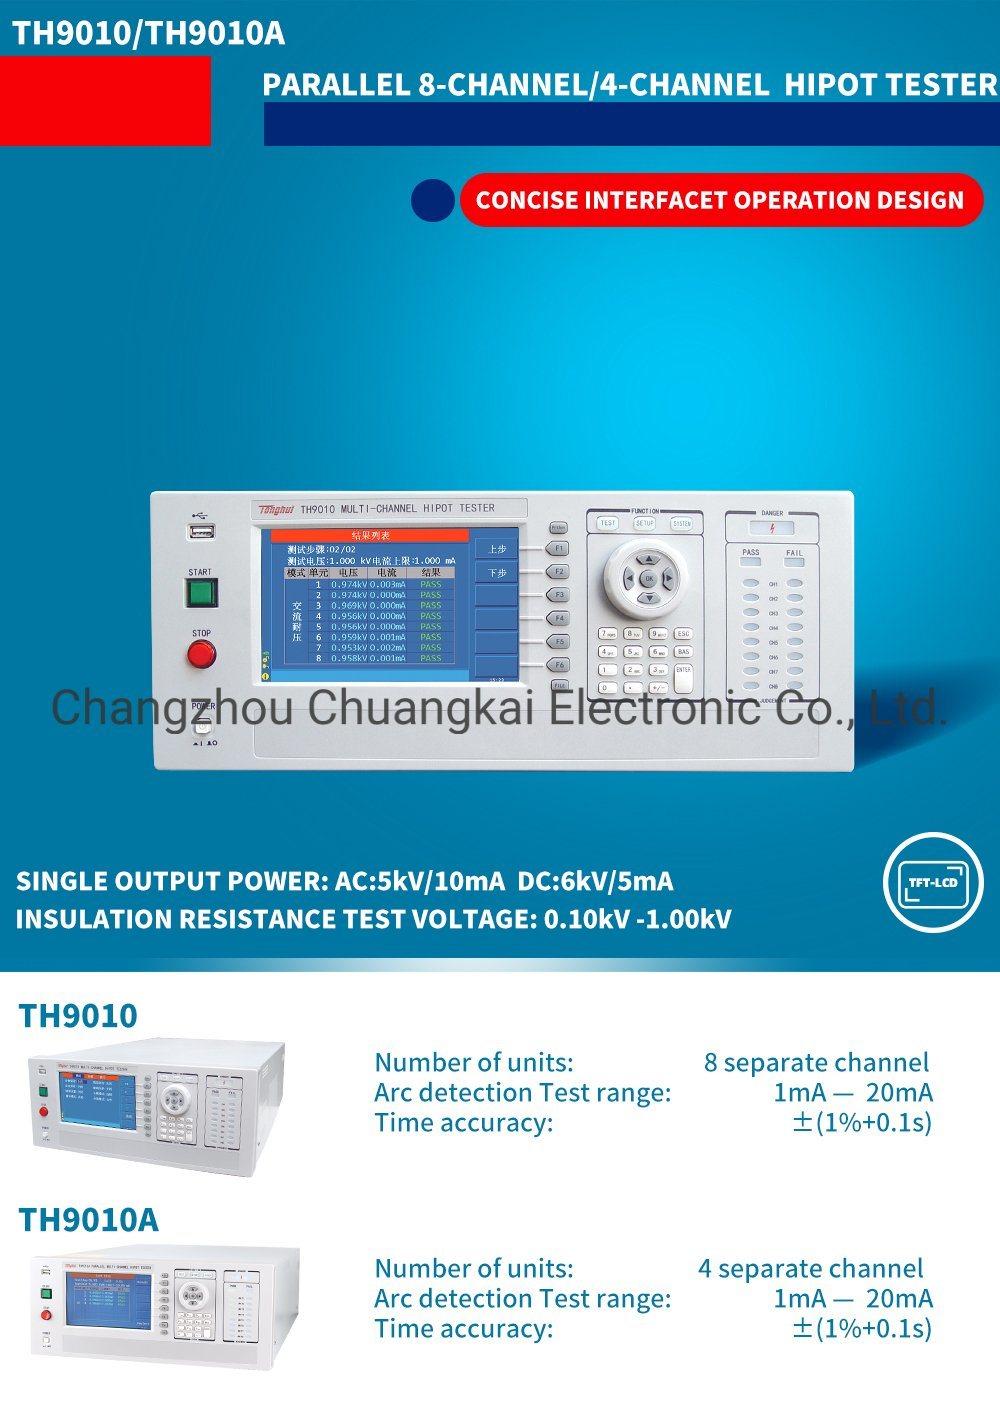 Th9010 Parallel 8-Channel Hipot Tester with AC 0-5000V DC 0-6000V